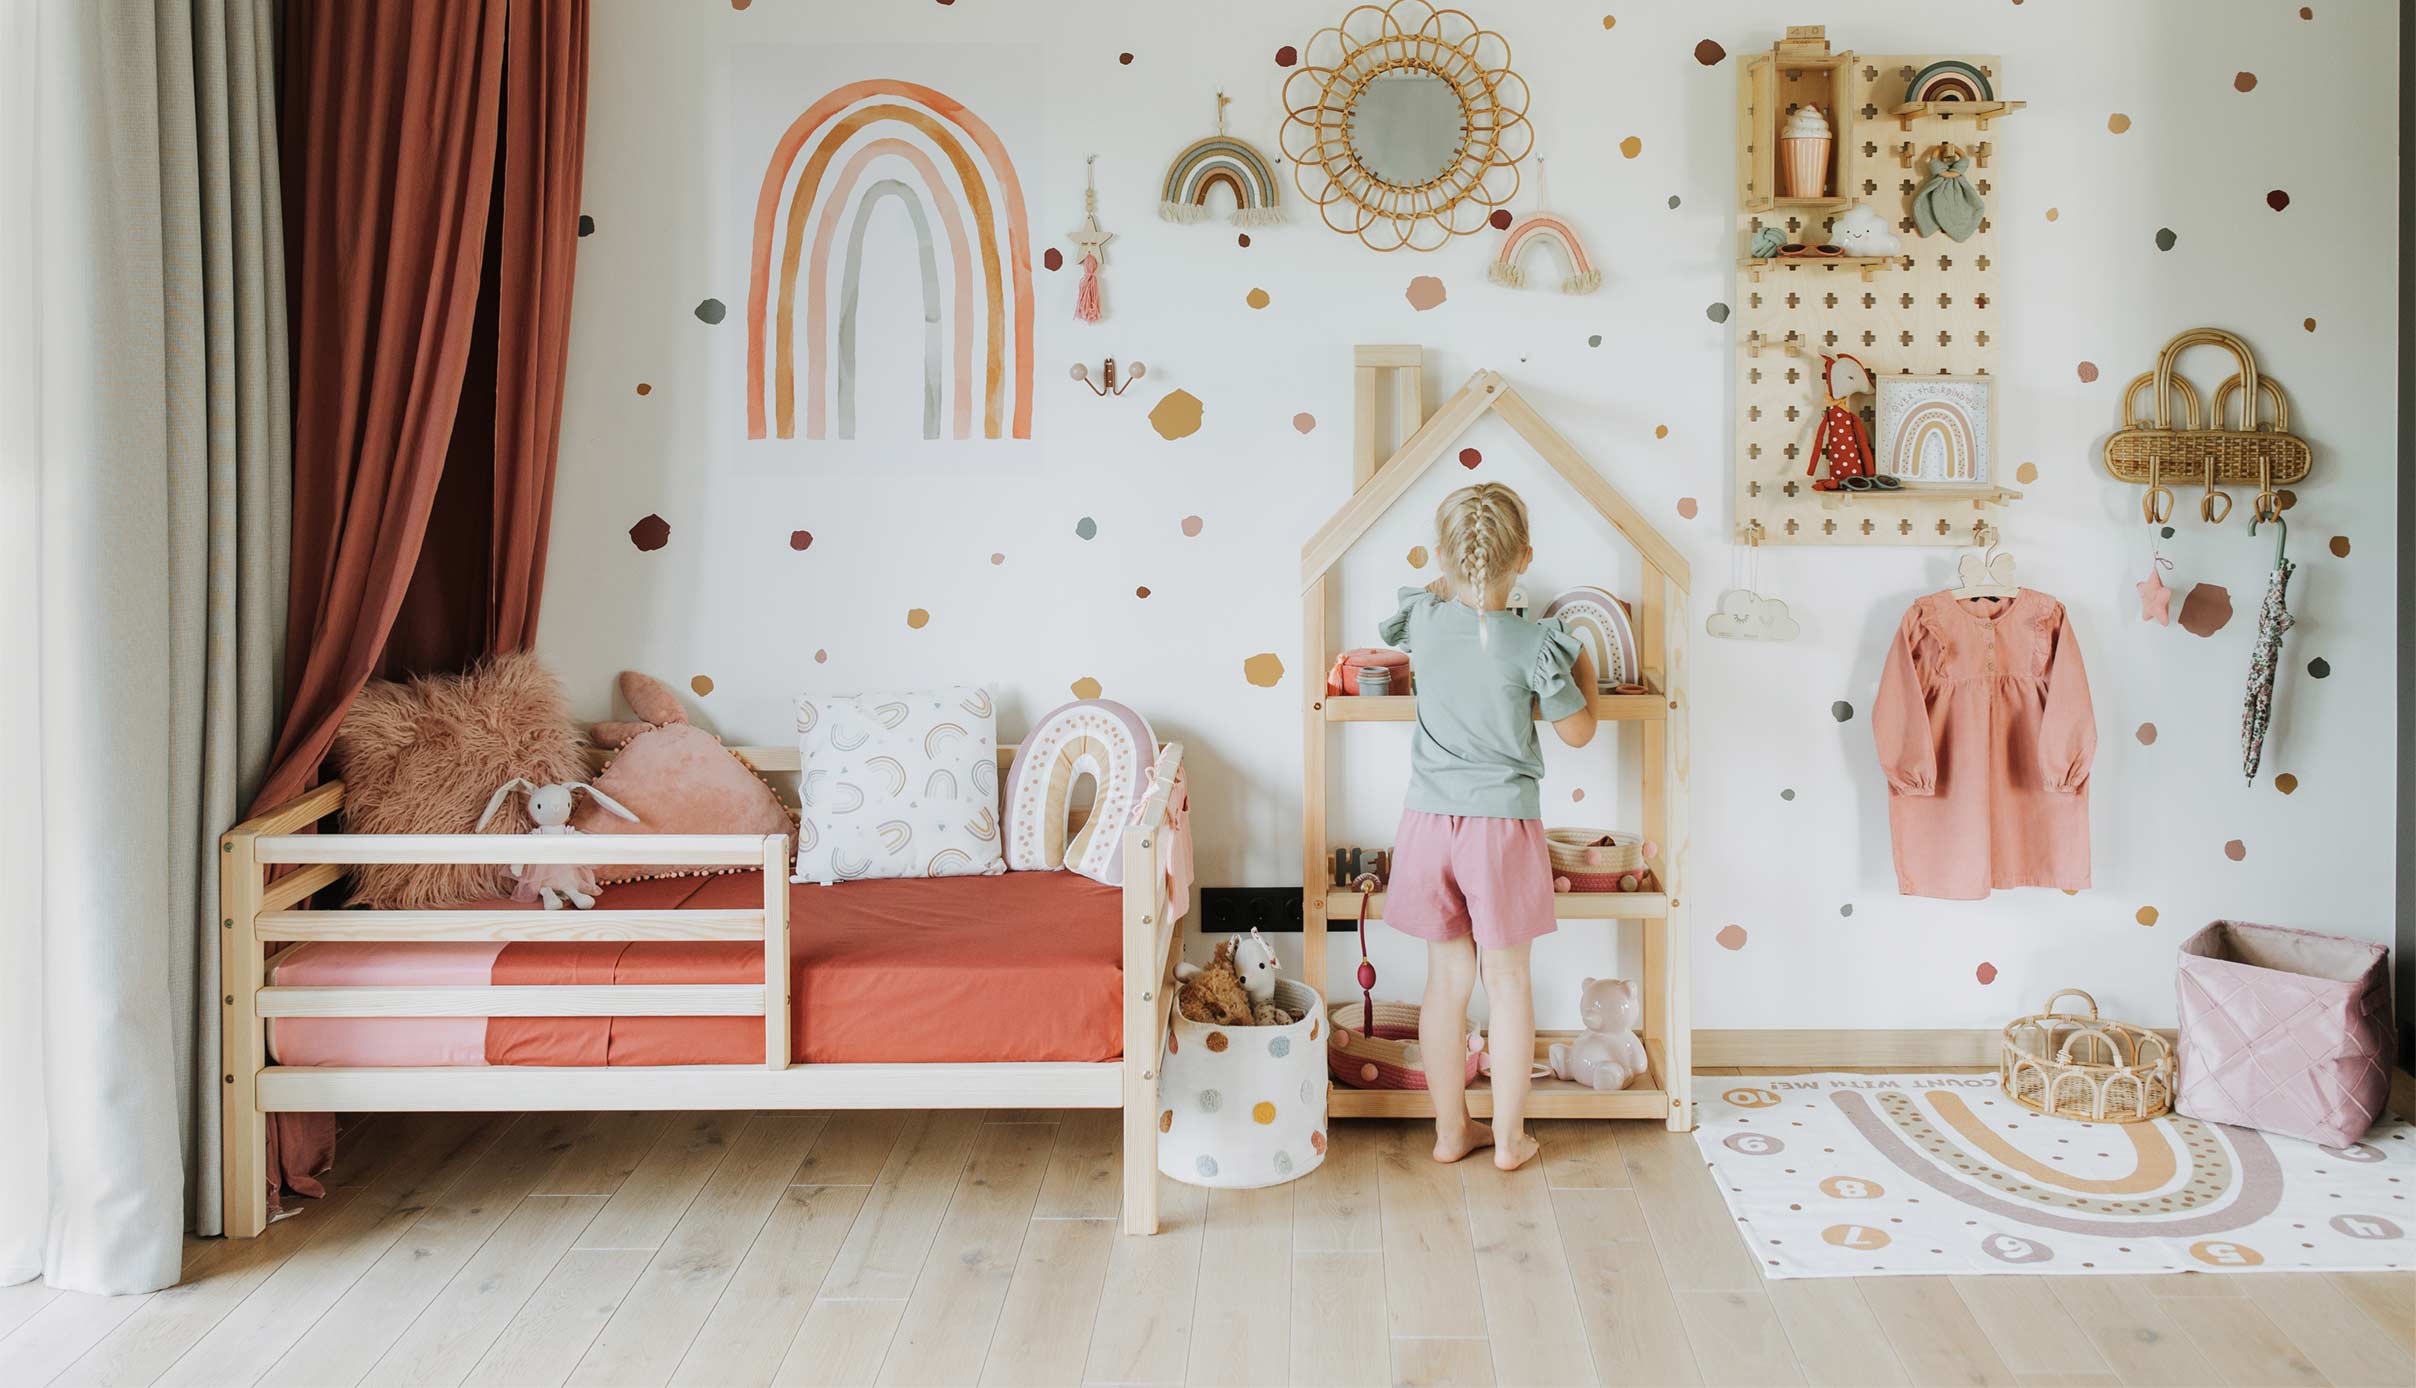 A child's room with a bed, shelves, and a rainbow wall.